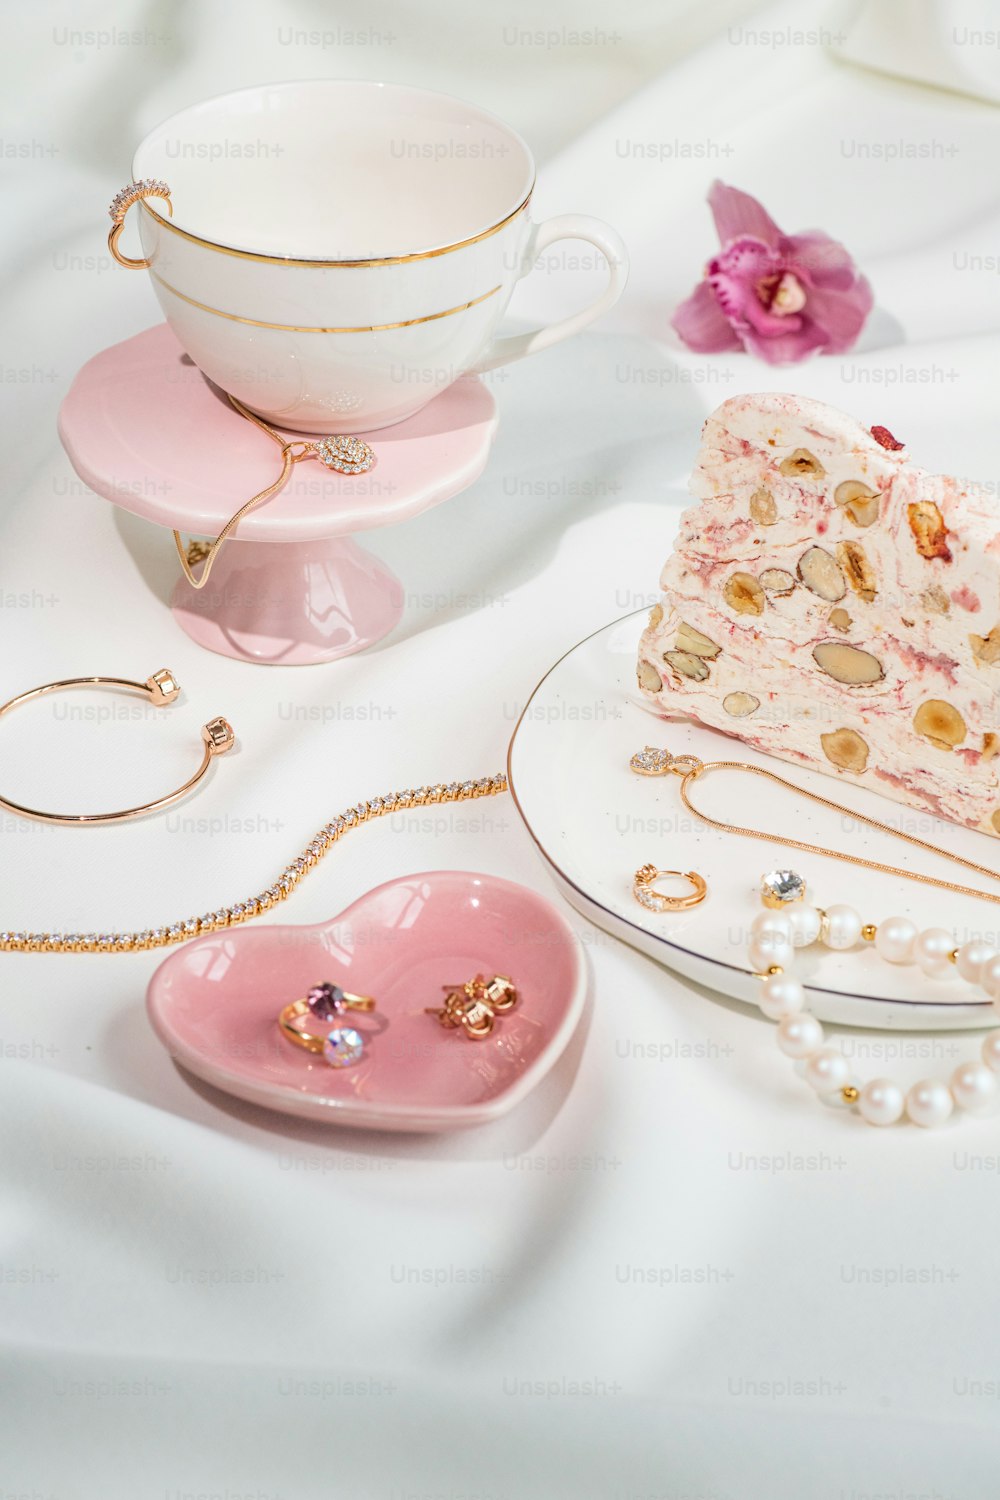 a table topped with a pink cake next to a cup and saucer